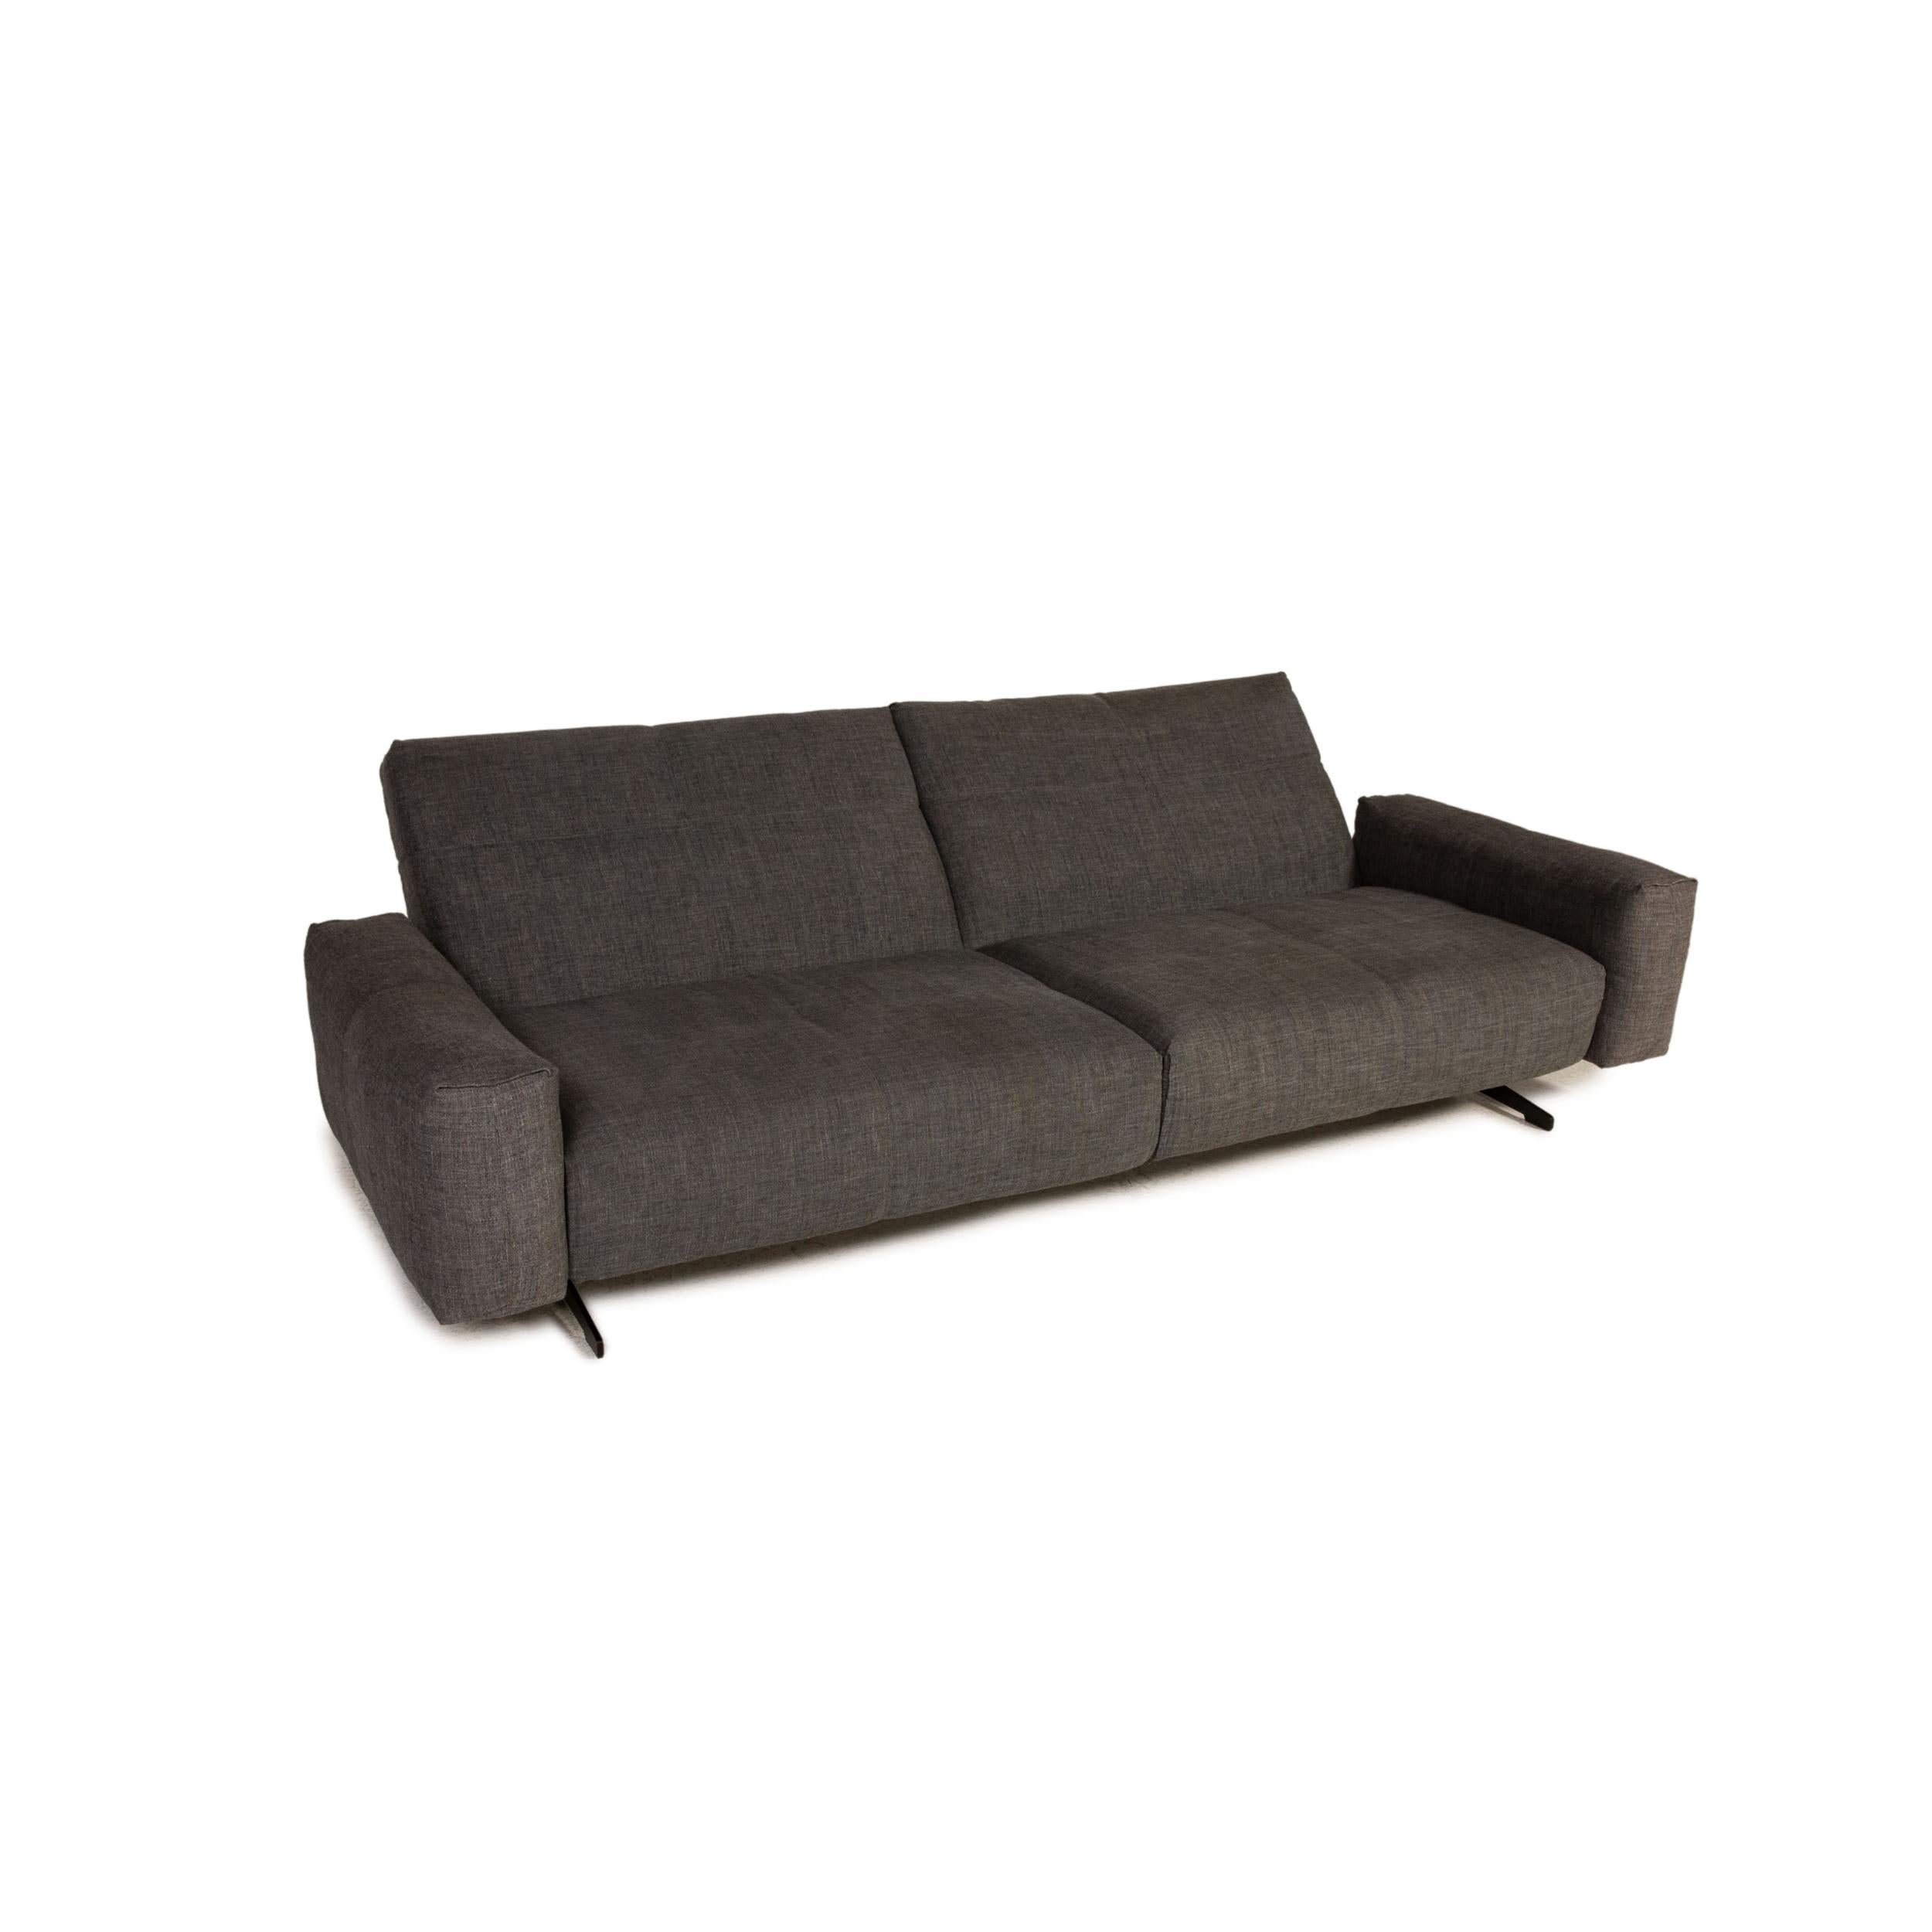 Modern Rolf Benz 50 Fabric Sofa Gray Four-Seater Couch Relaxation Function For Sale